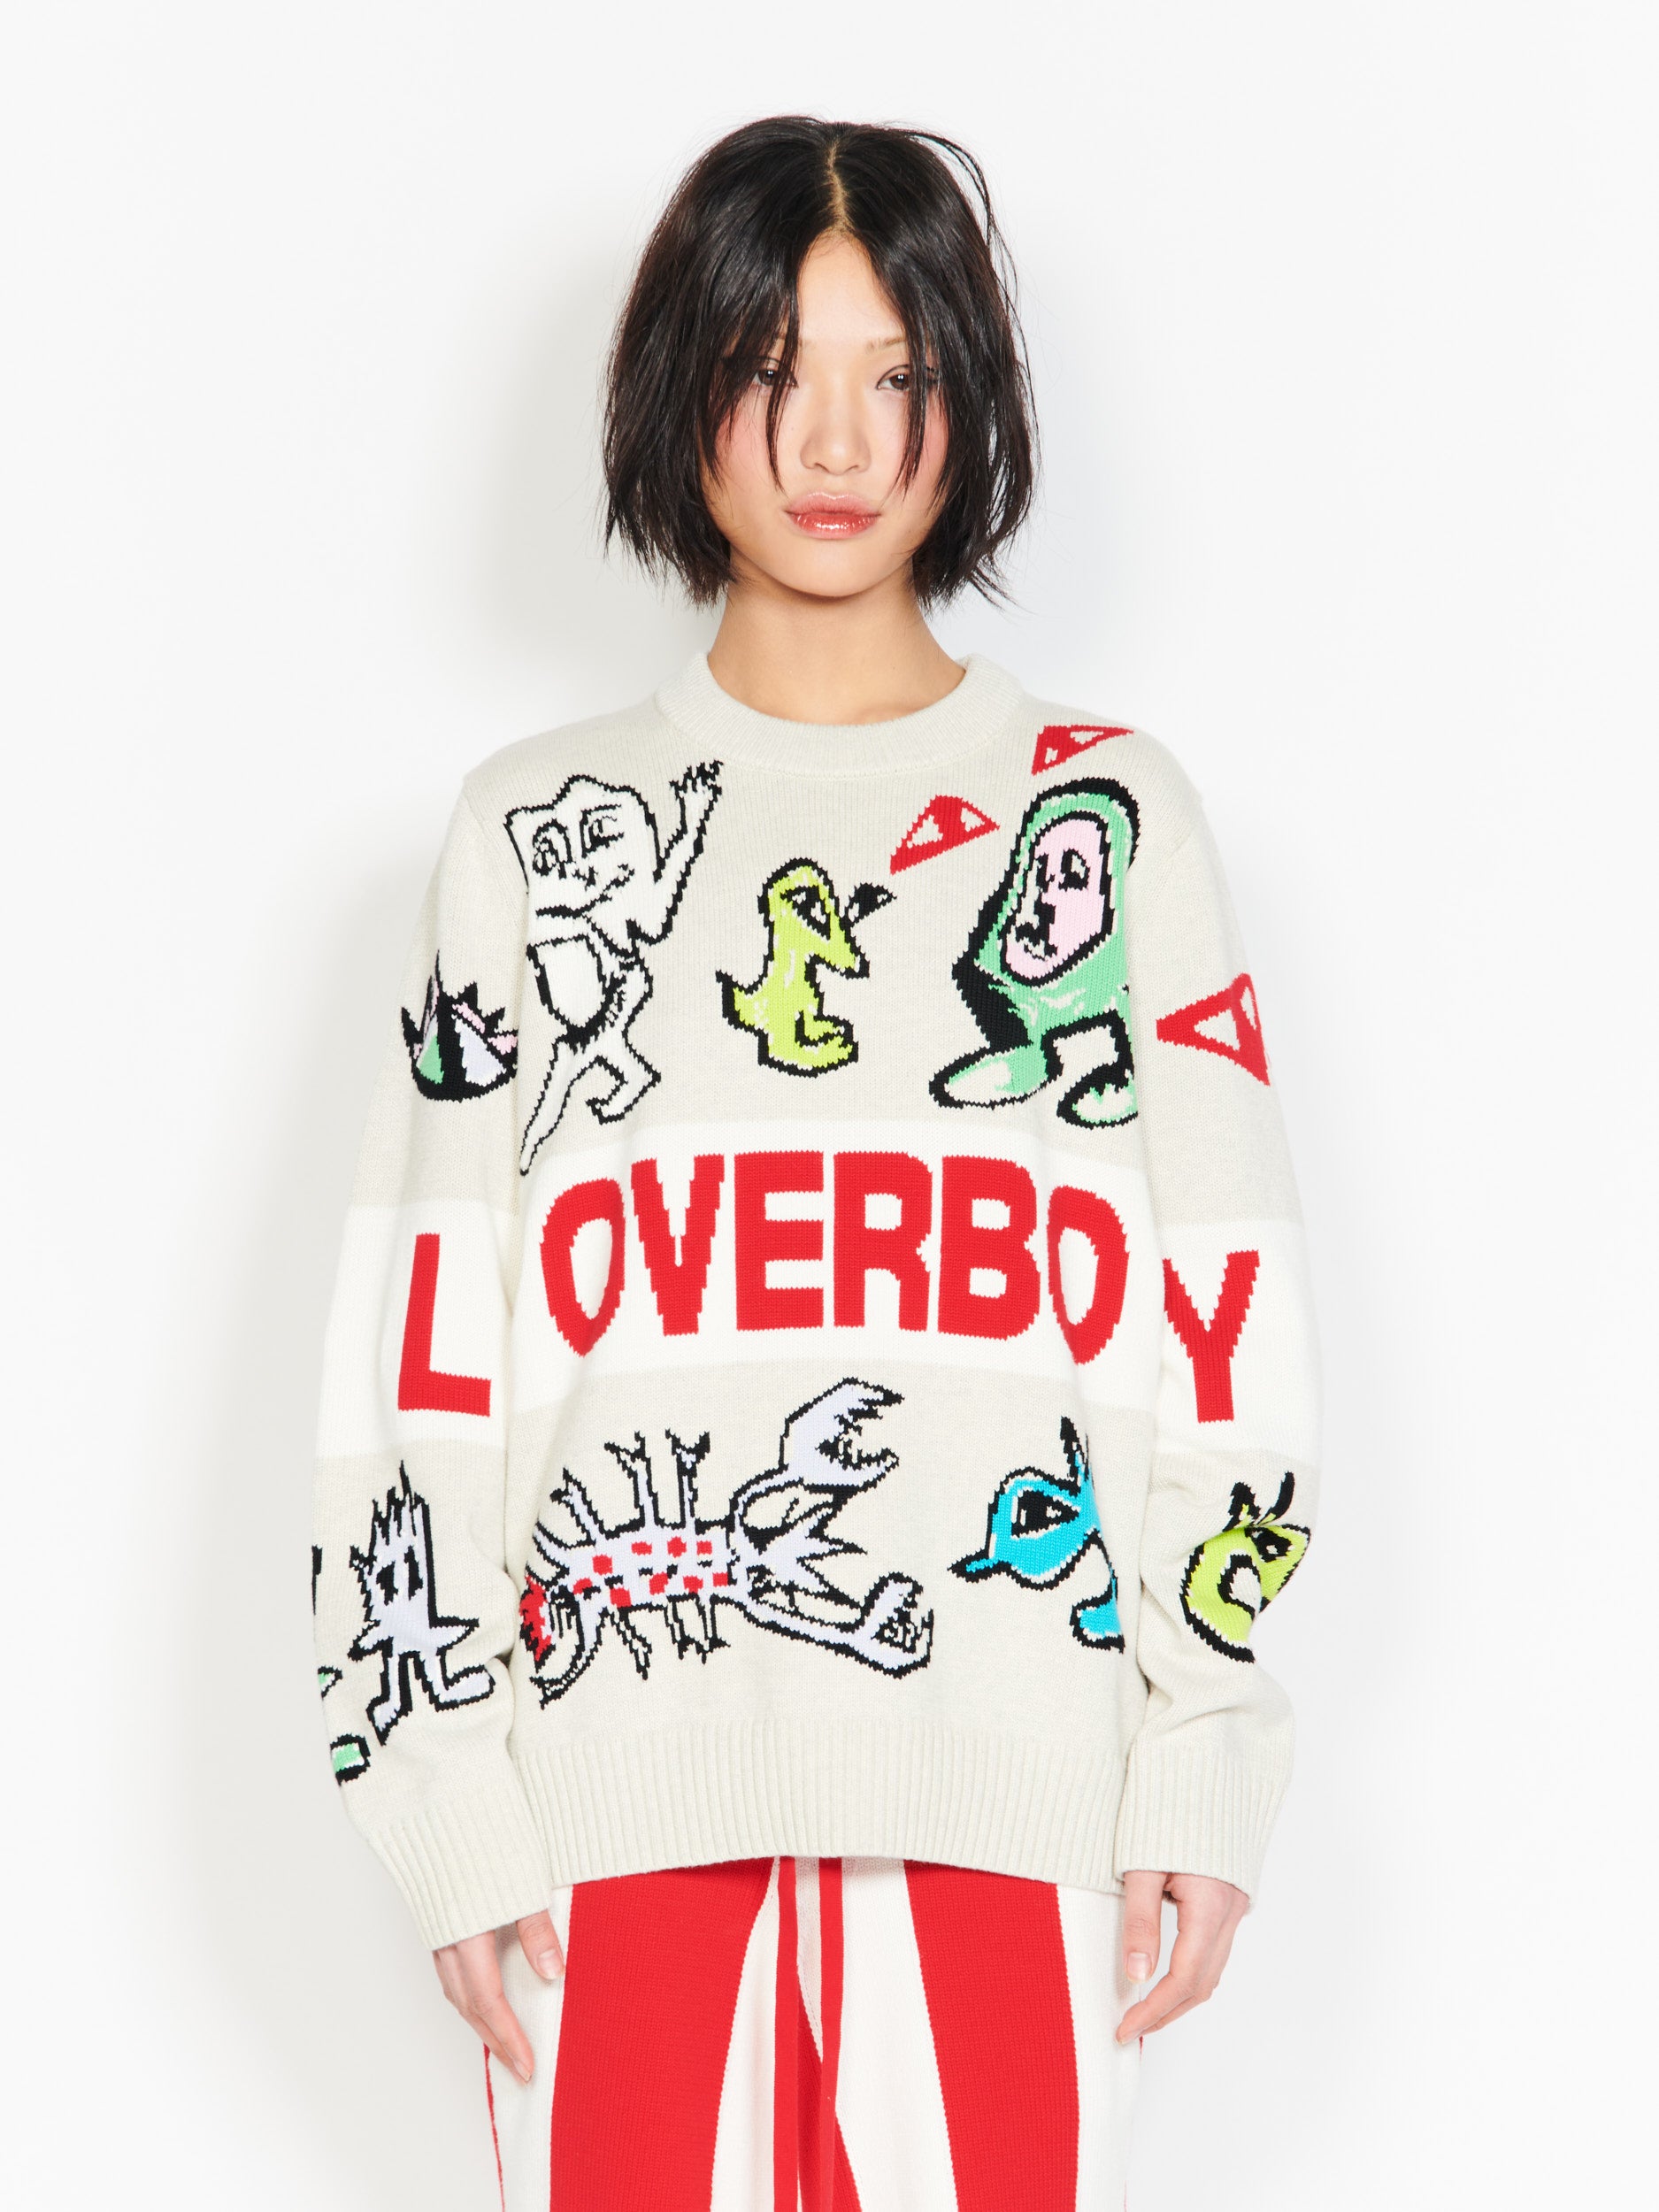 New Arrivals clothing | Charles Jeffrey Loverboy